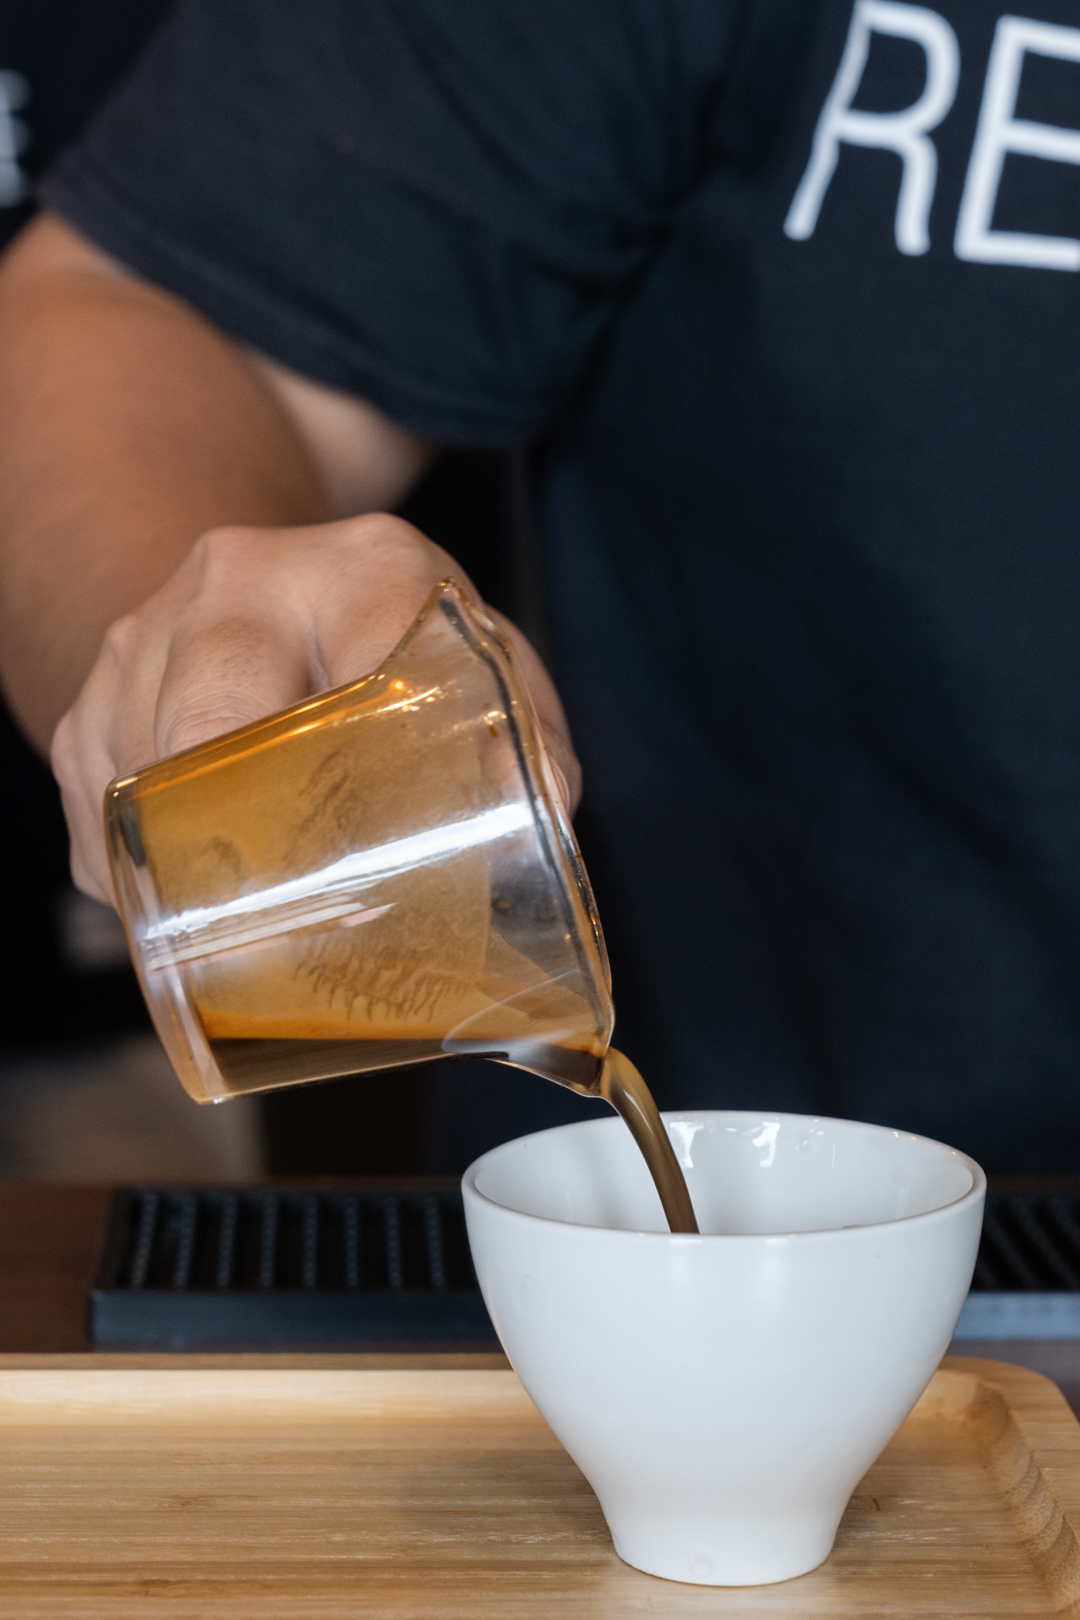 Their cortado or "duet" separates the espresso and milk base for a double coffee experience